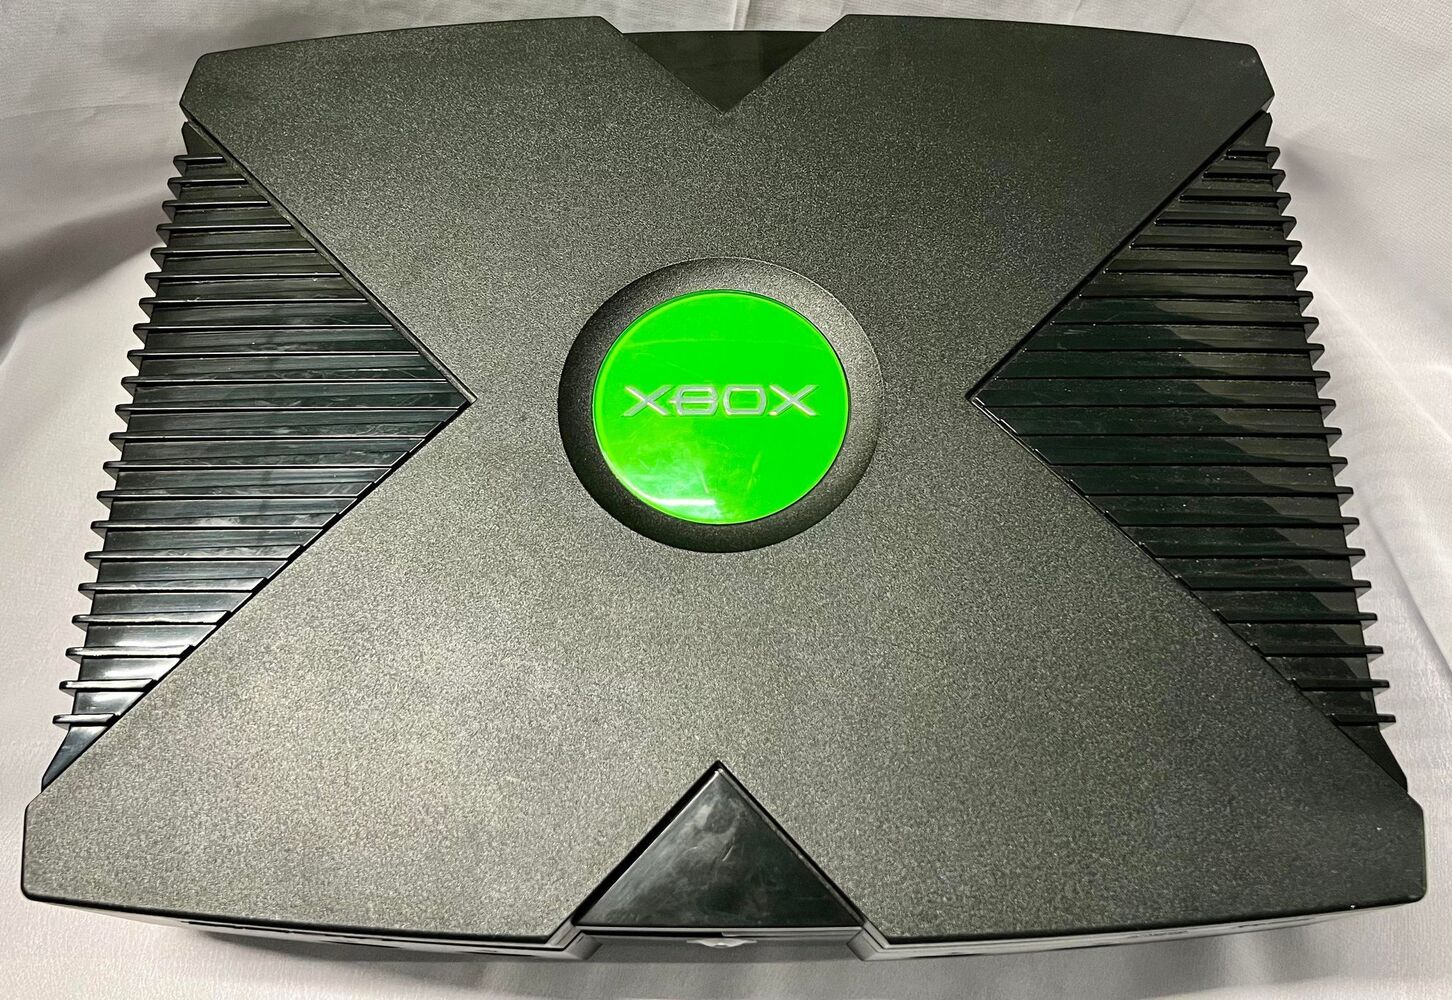 Microsoft Original Xbox Video Game System Console w/ Cords & Controller TESTED